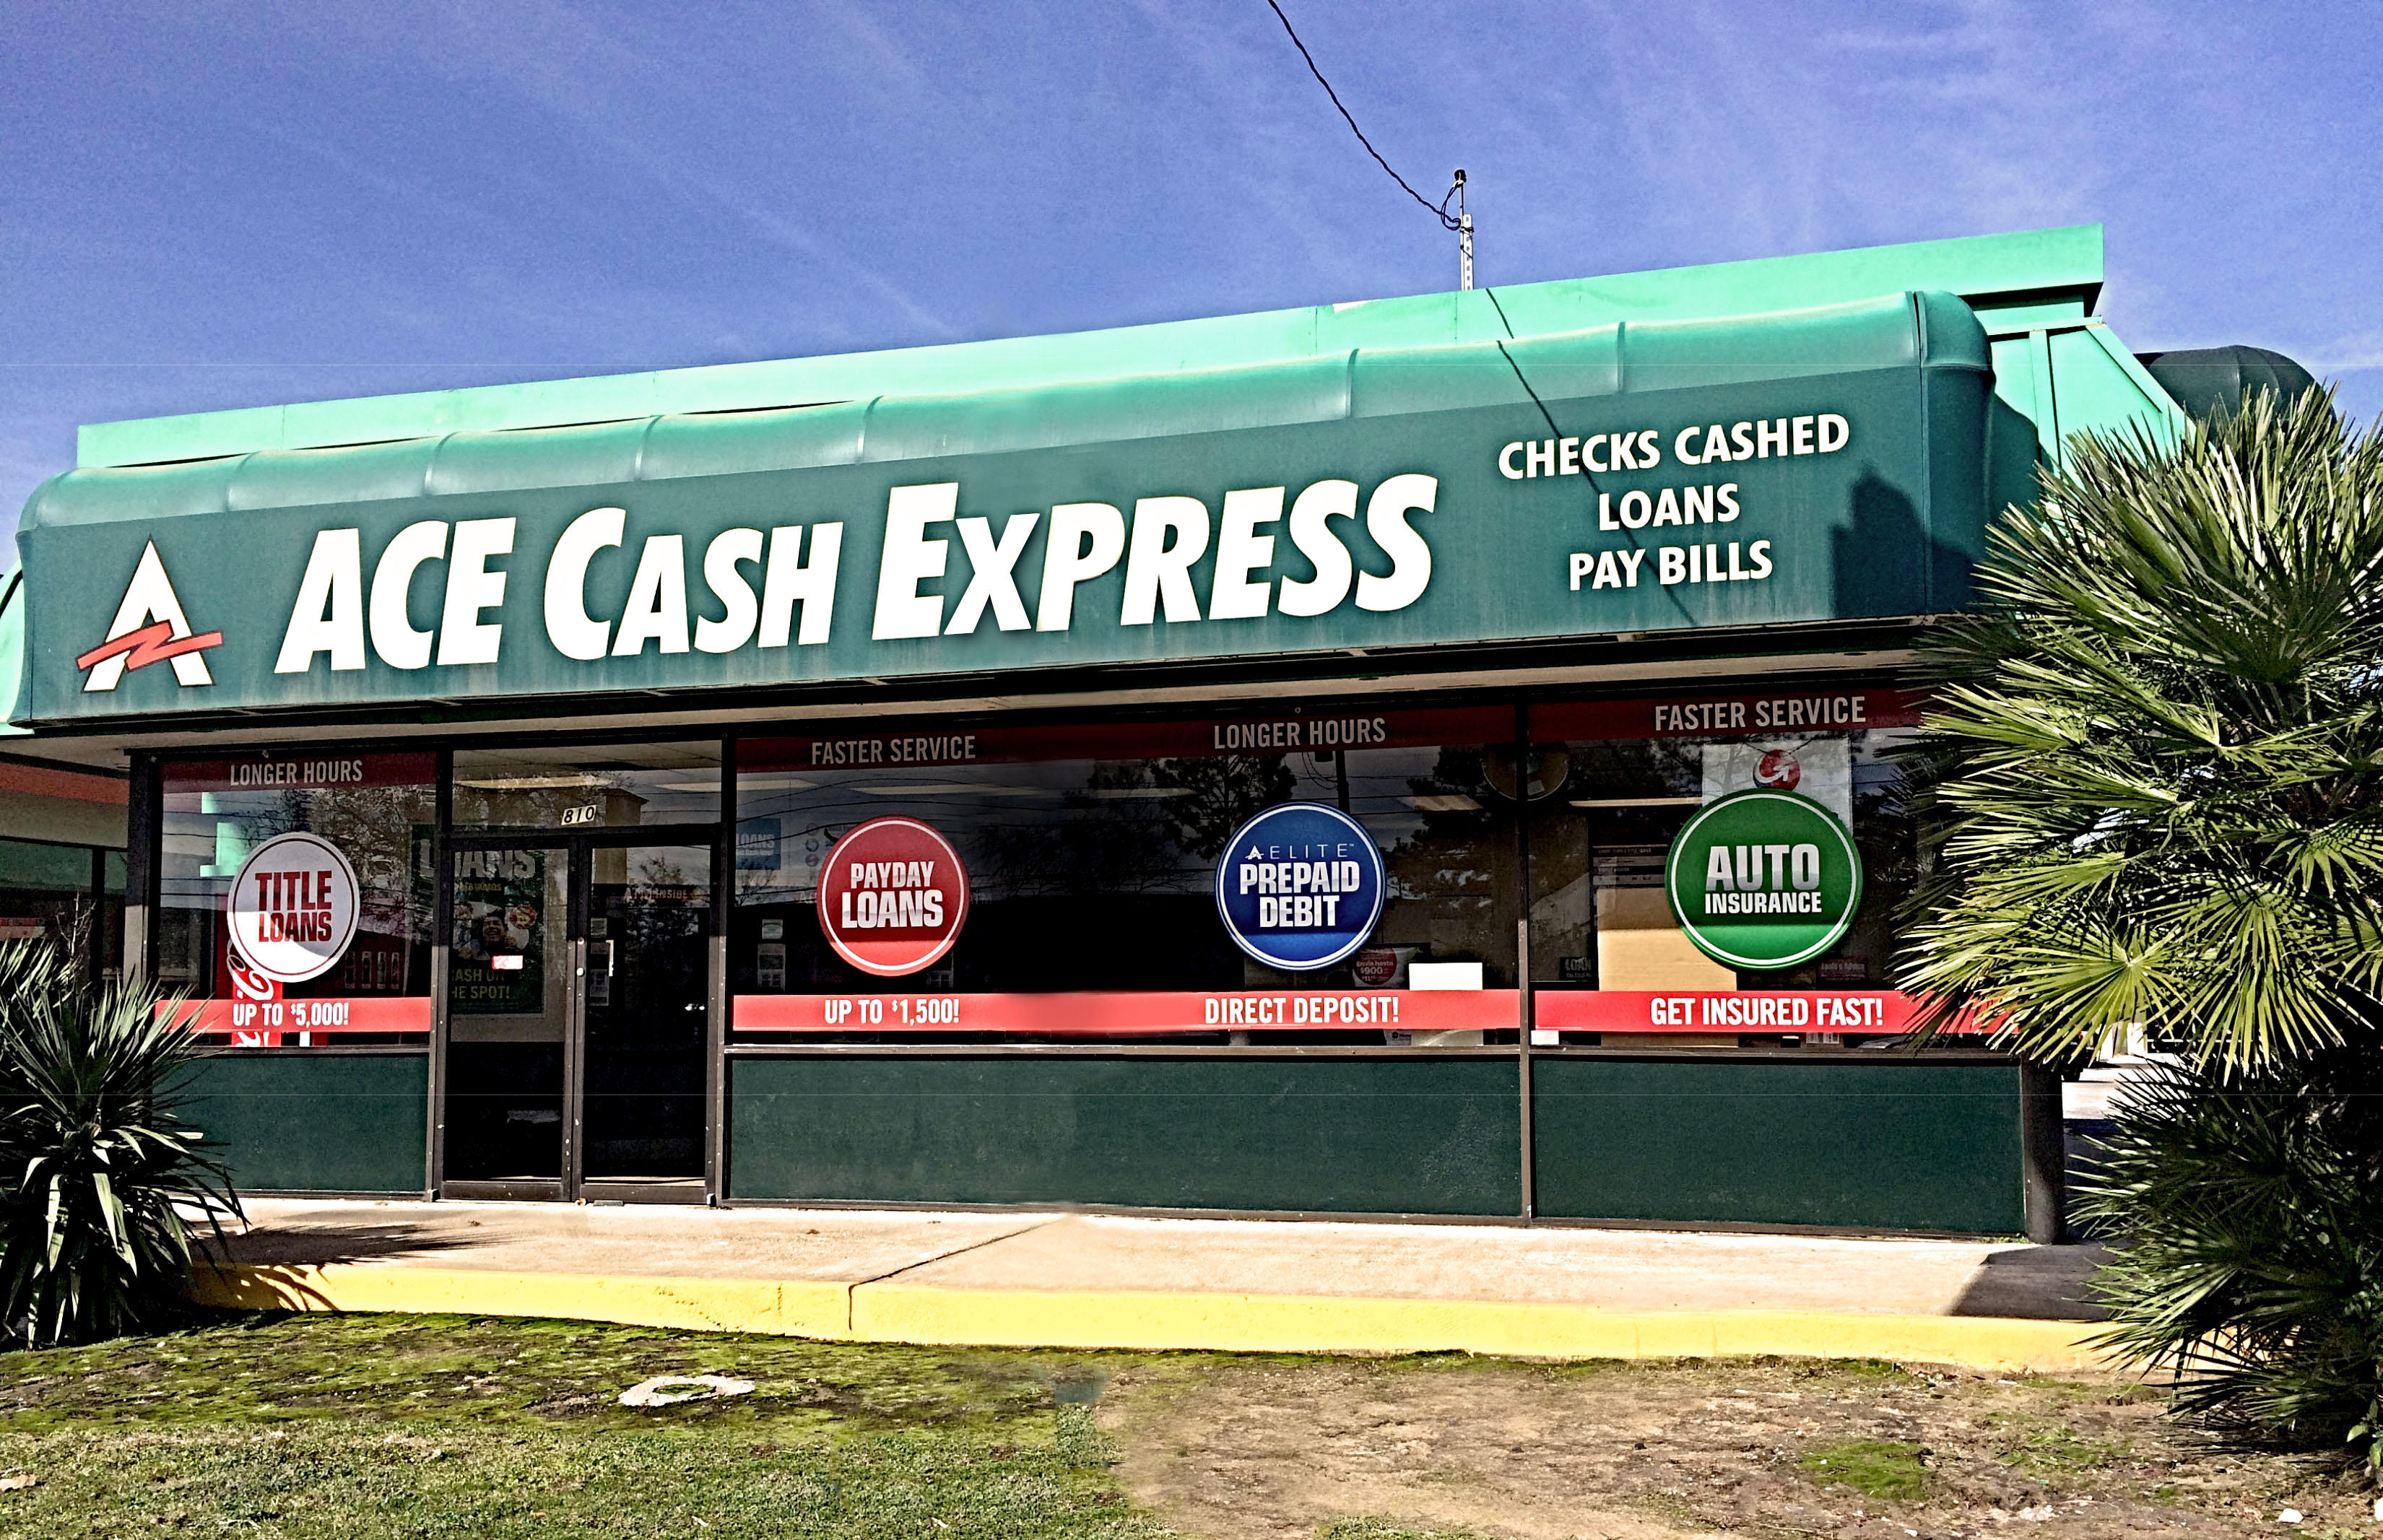 ACE Cash Express Coupons near me in Houston, TX 77090 ...